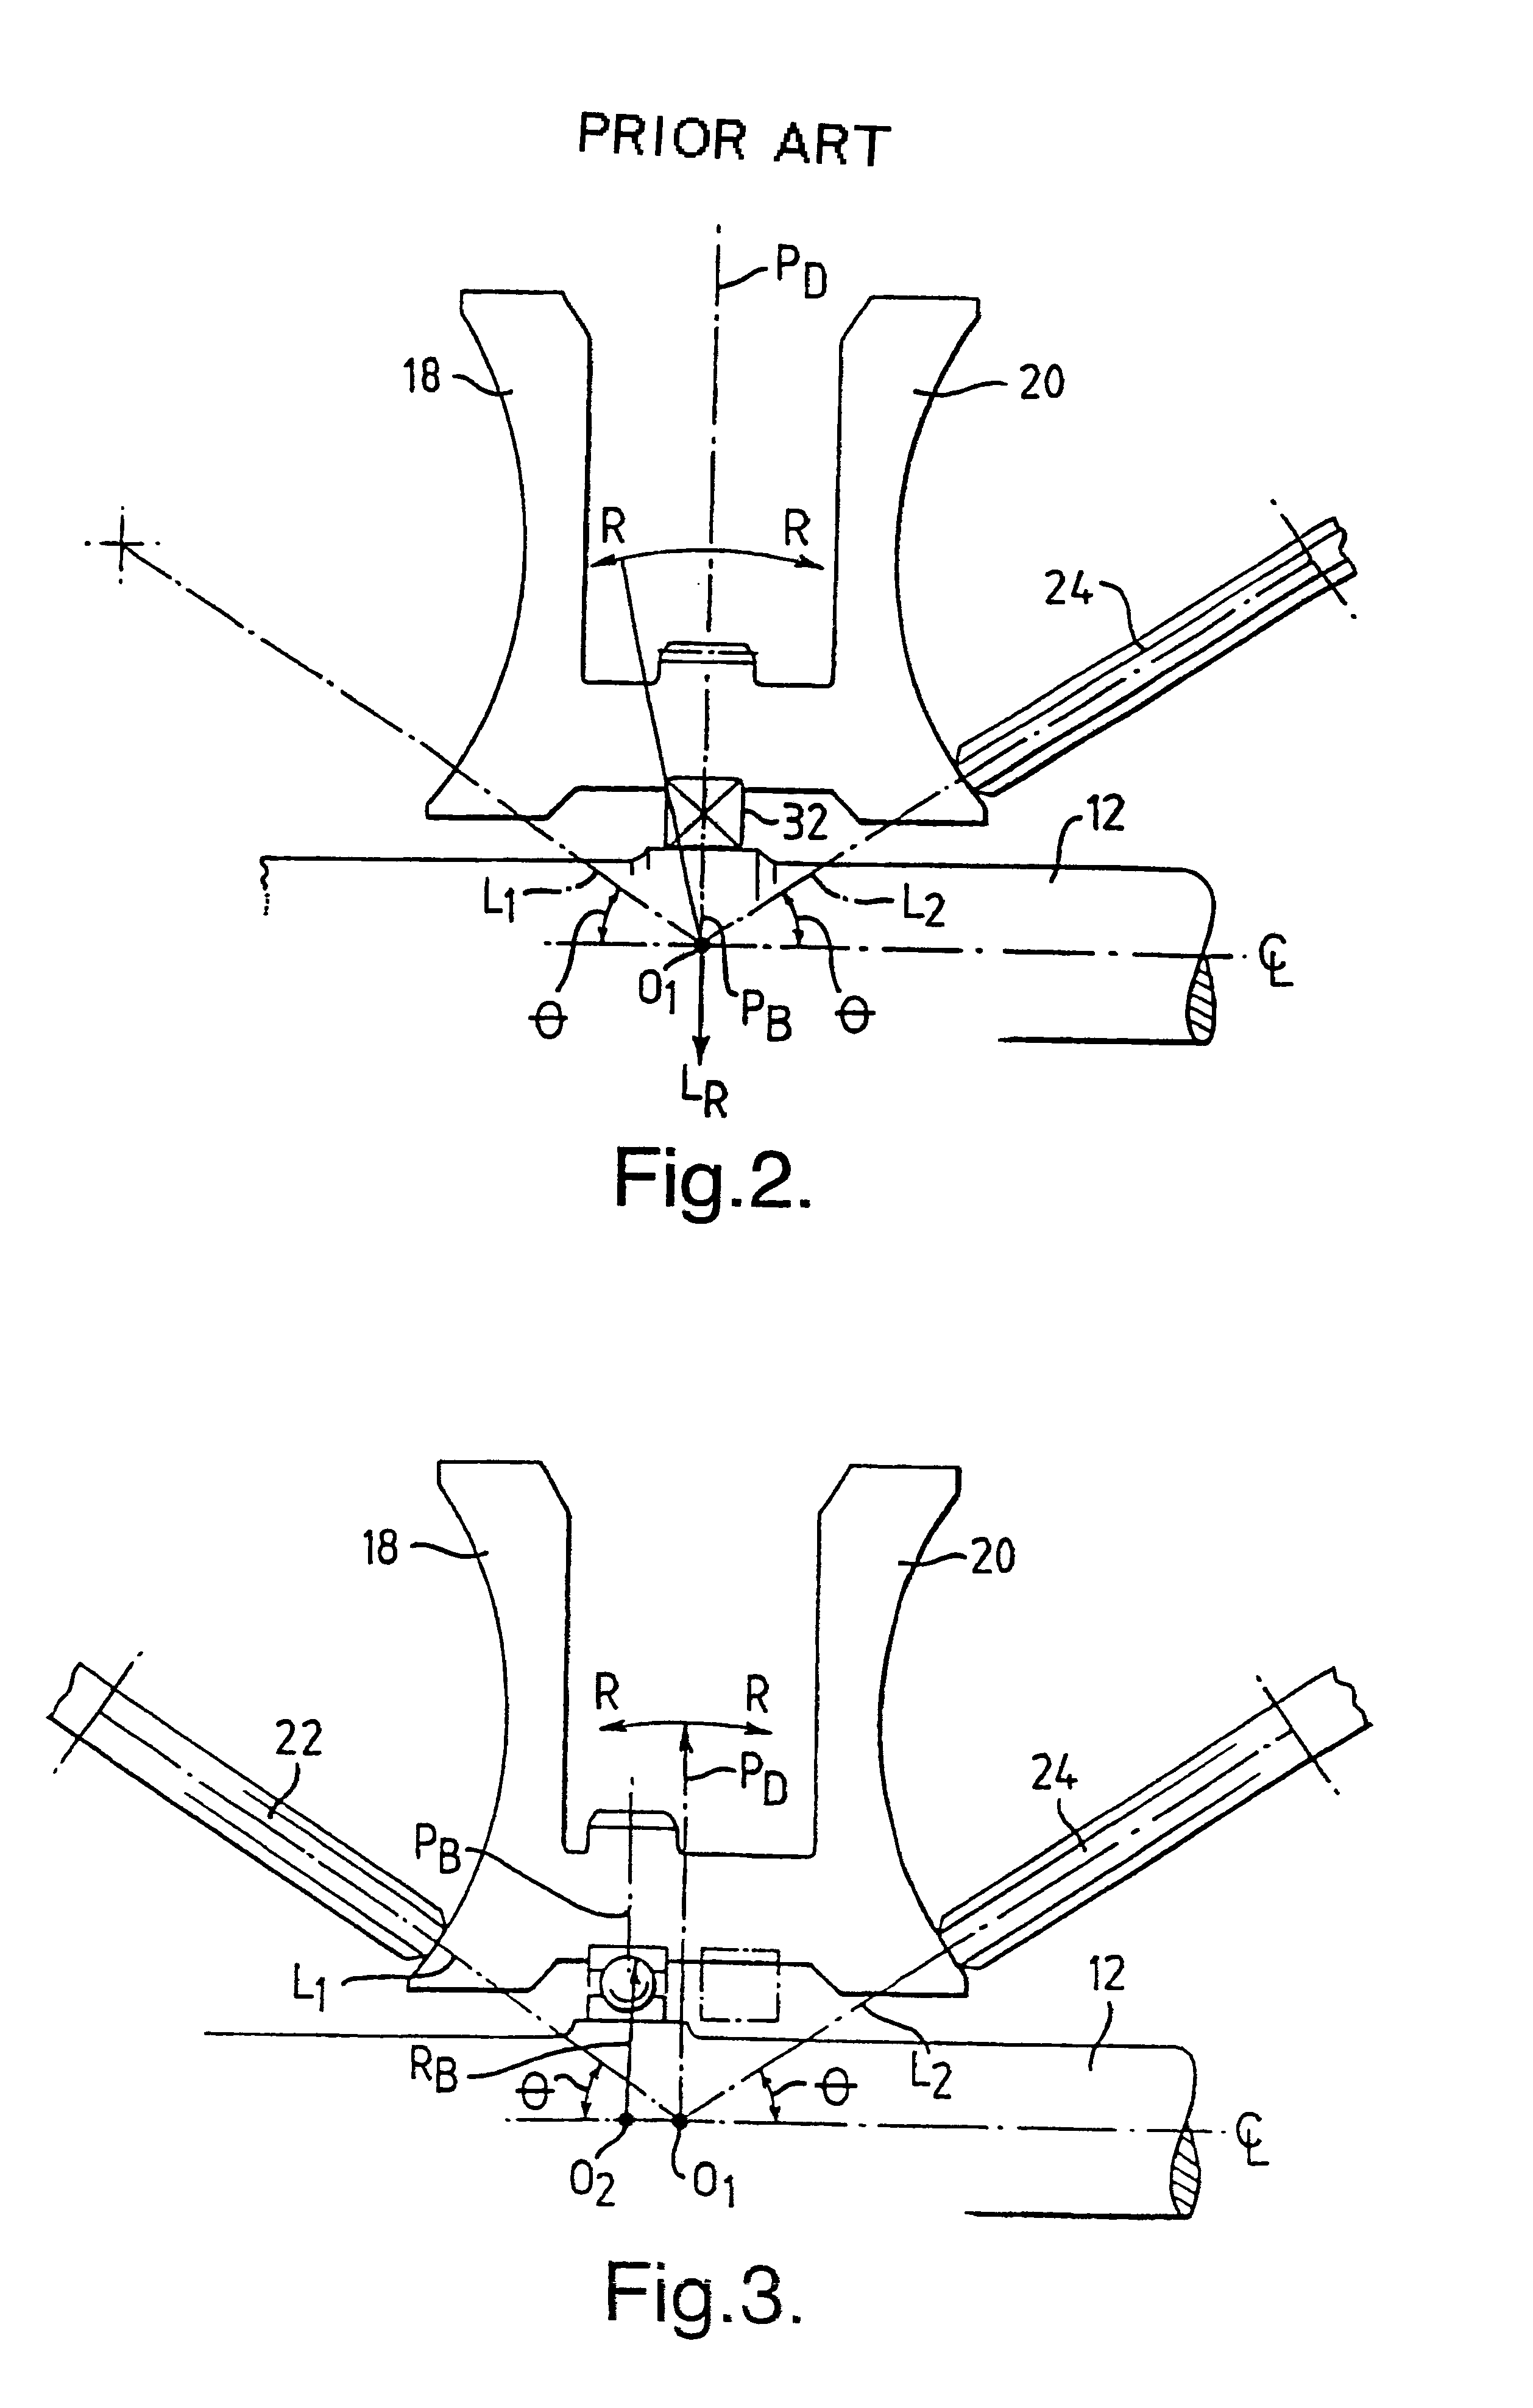 Bearing support for infinitely-variable-ratio transmission output discs